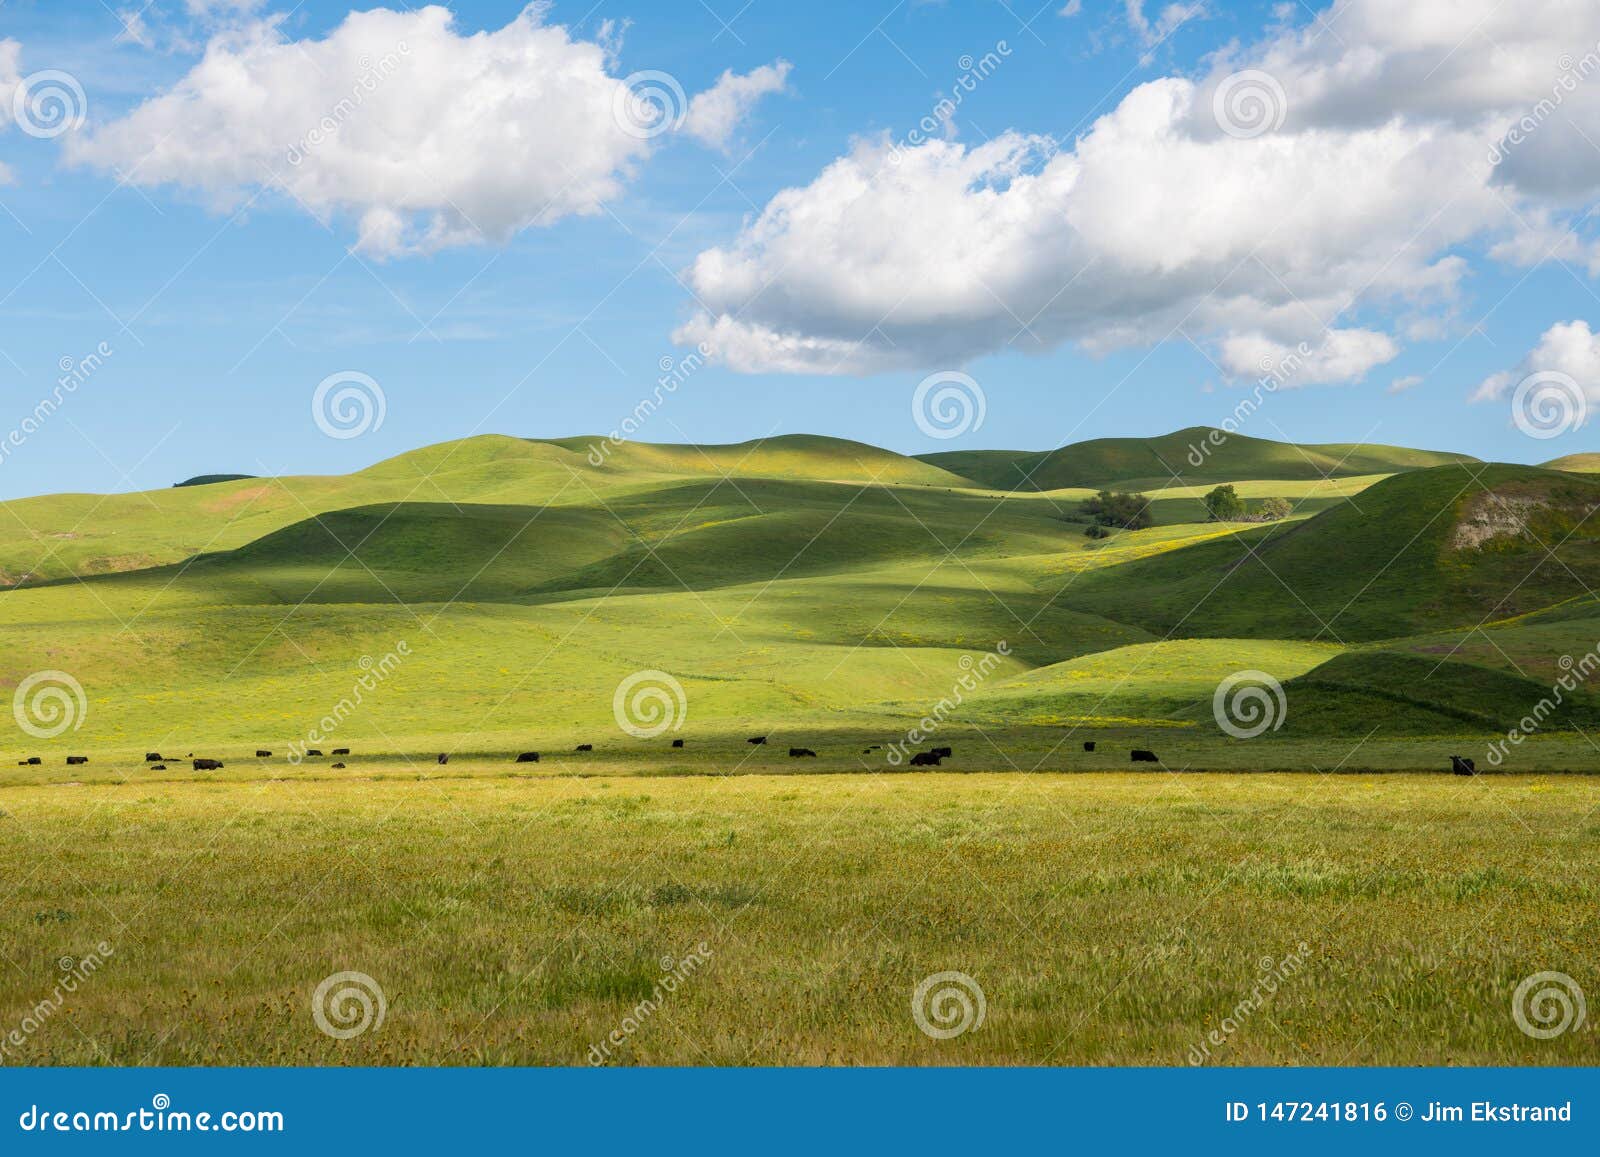 a herd of cattle grazing in sun-dappled lush green grasslands and rolling hills under a beautiful blue sky with puffy white clouds